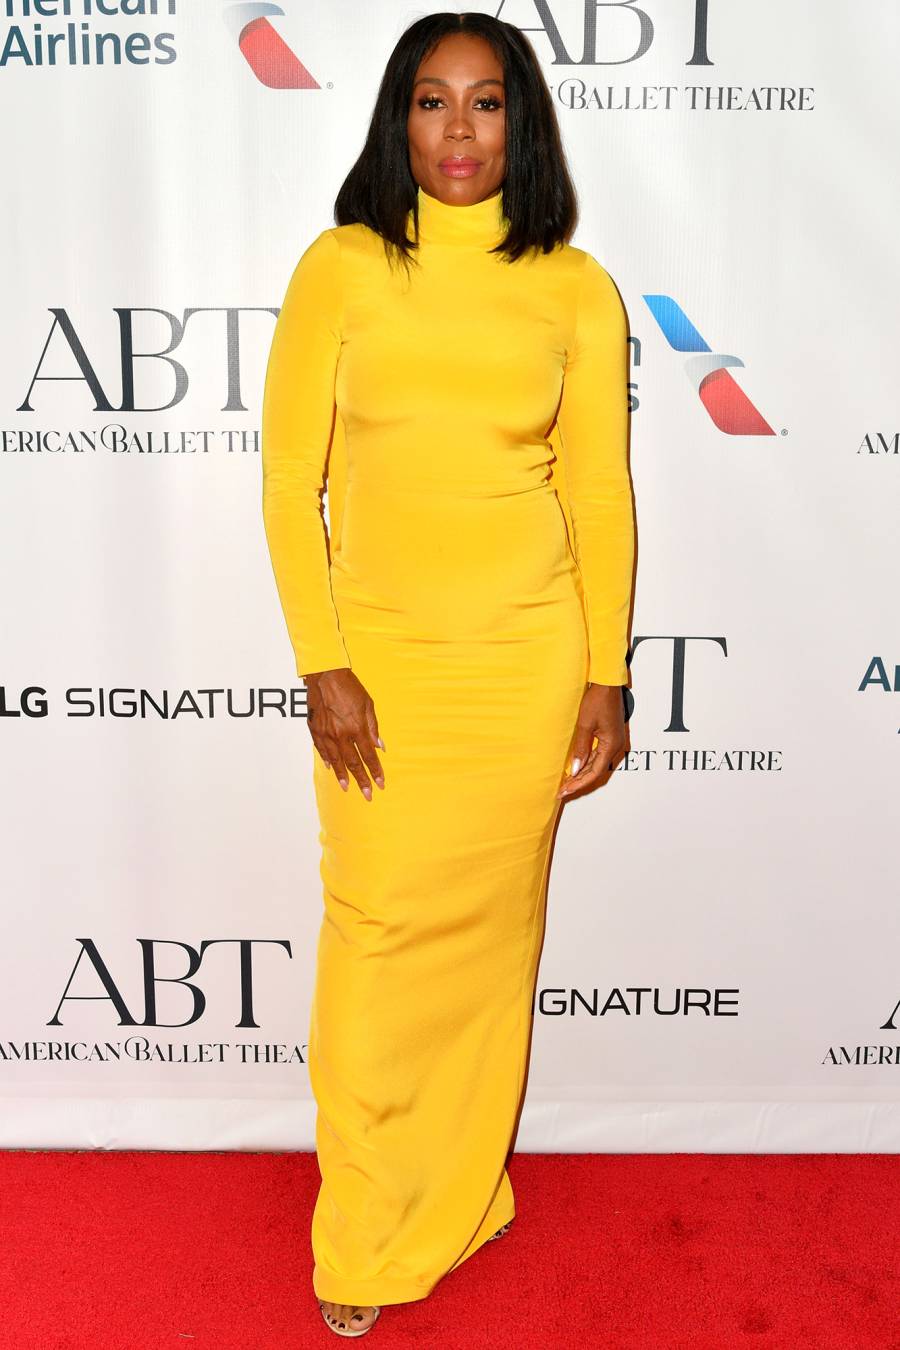 See What the Stars Wore to the 2021 American Ballet Theatre’s Fall Gala